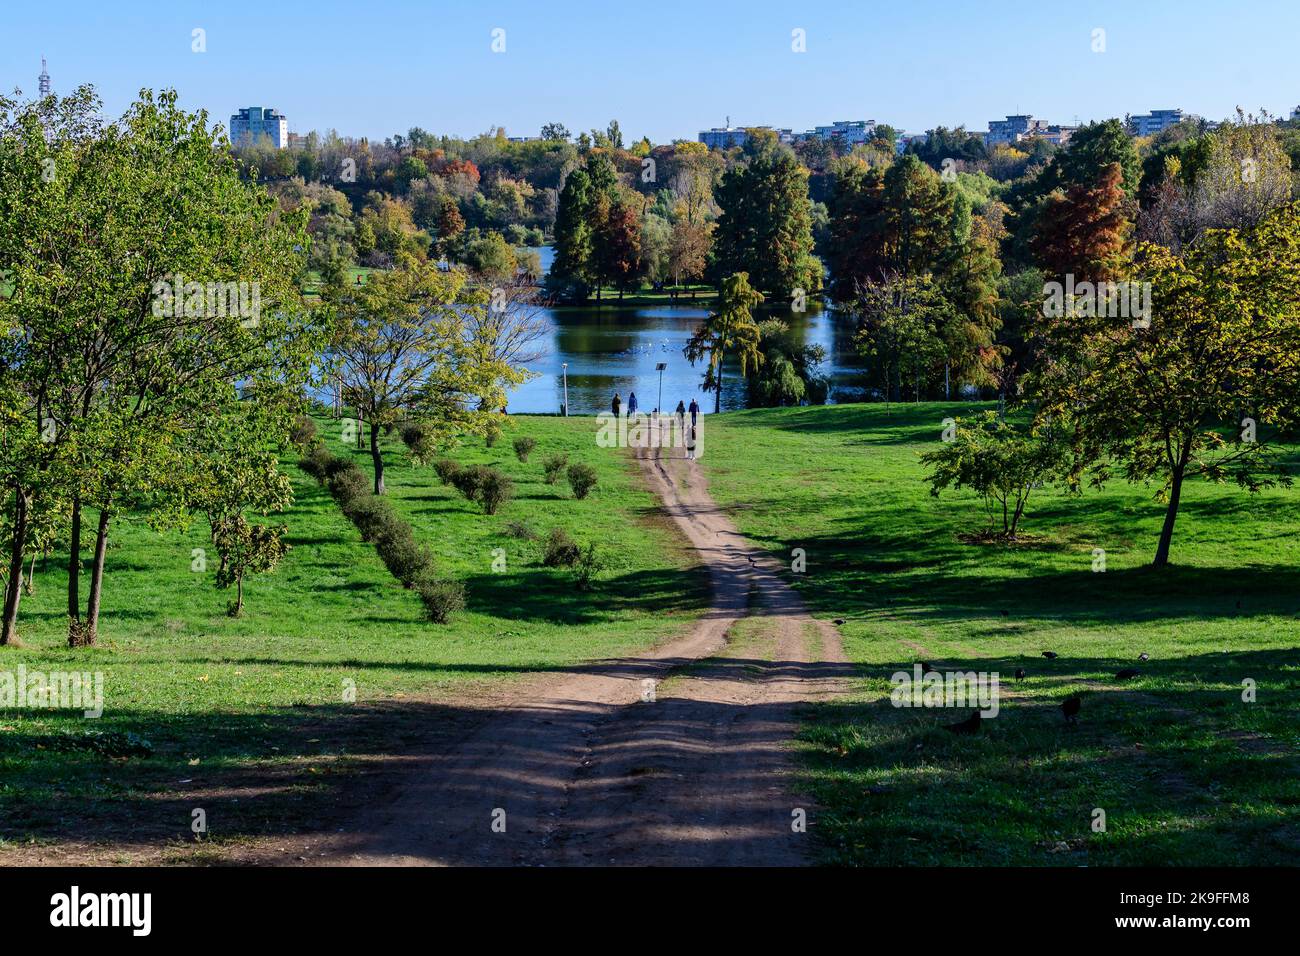 Landscape with footpath surrounded by vivid green and yellow trees, plants trees and grass towards the lake in Parcul Tineretului (Tineretului Park) i Stock Photo